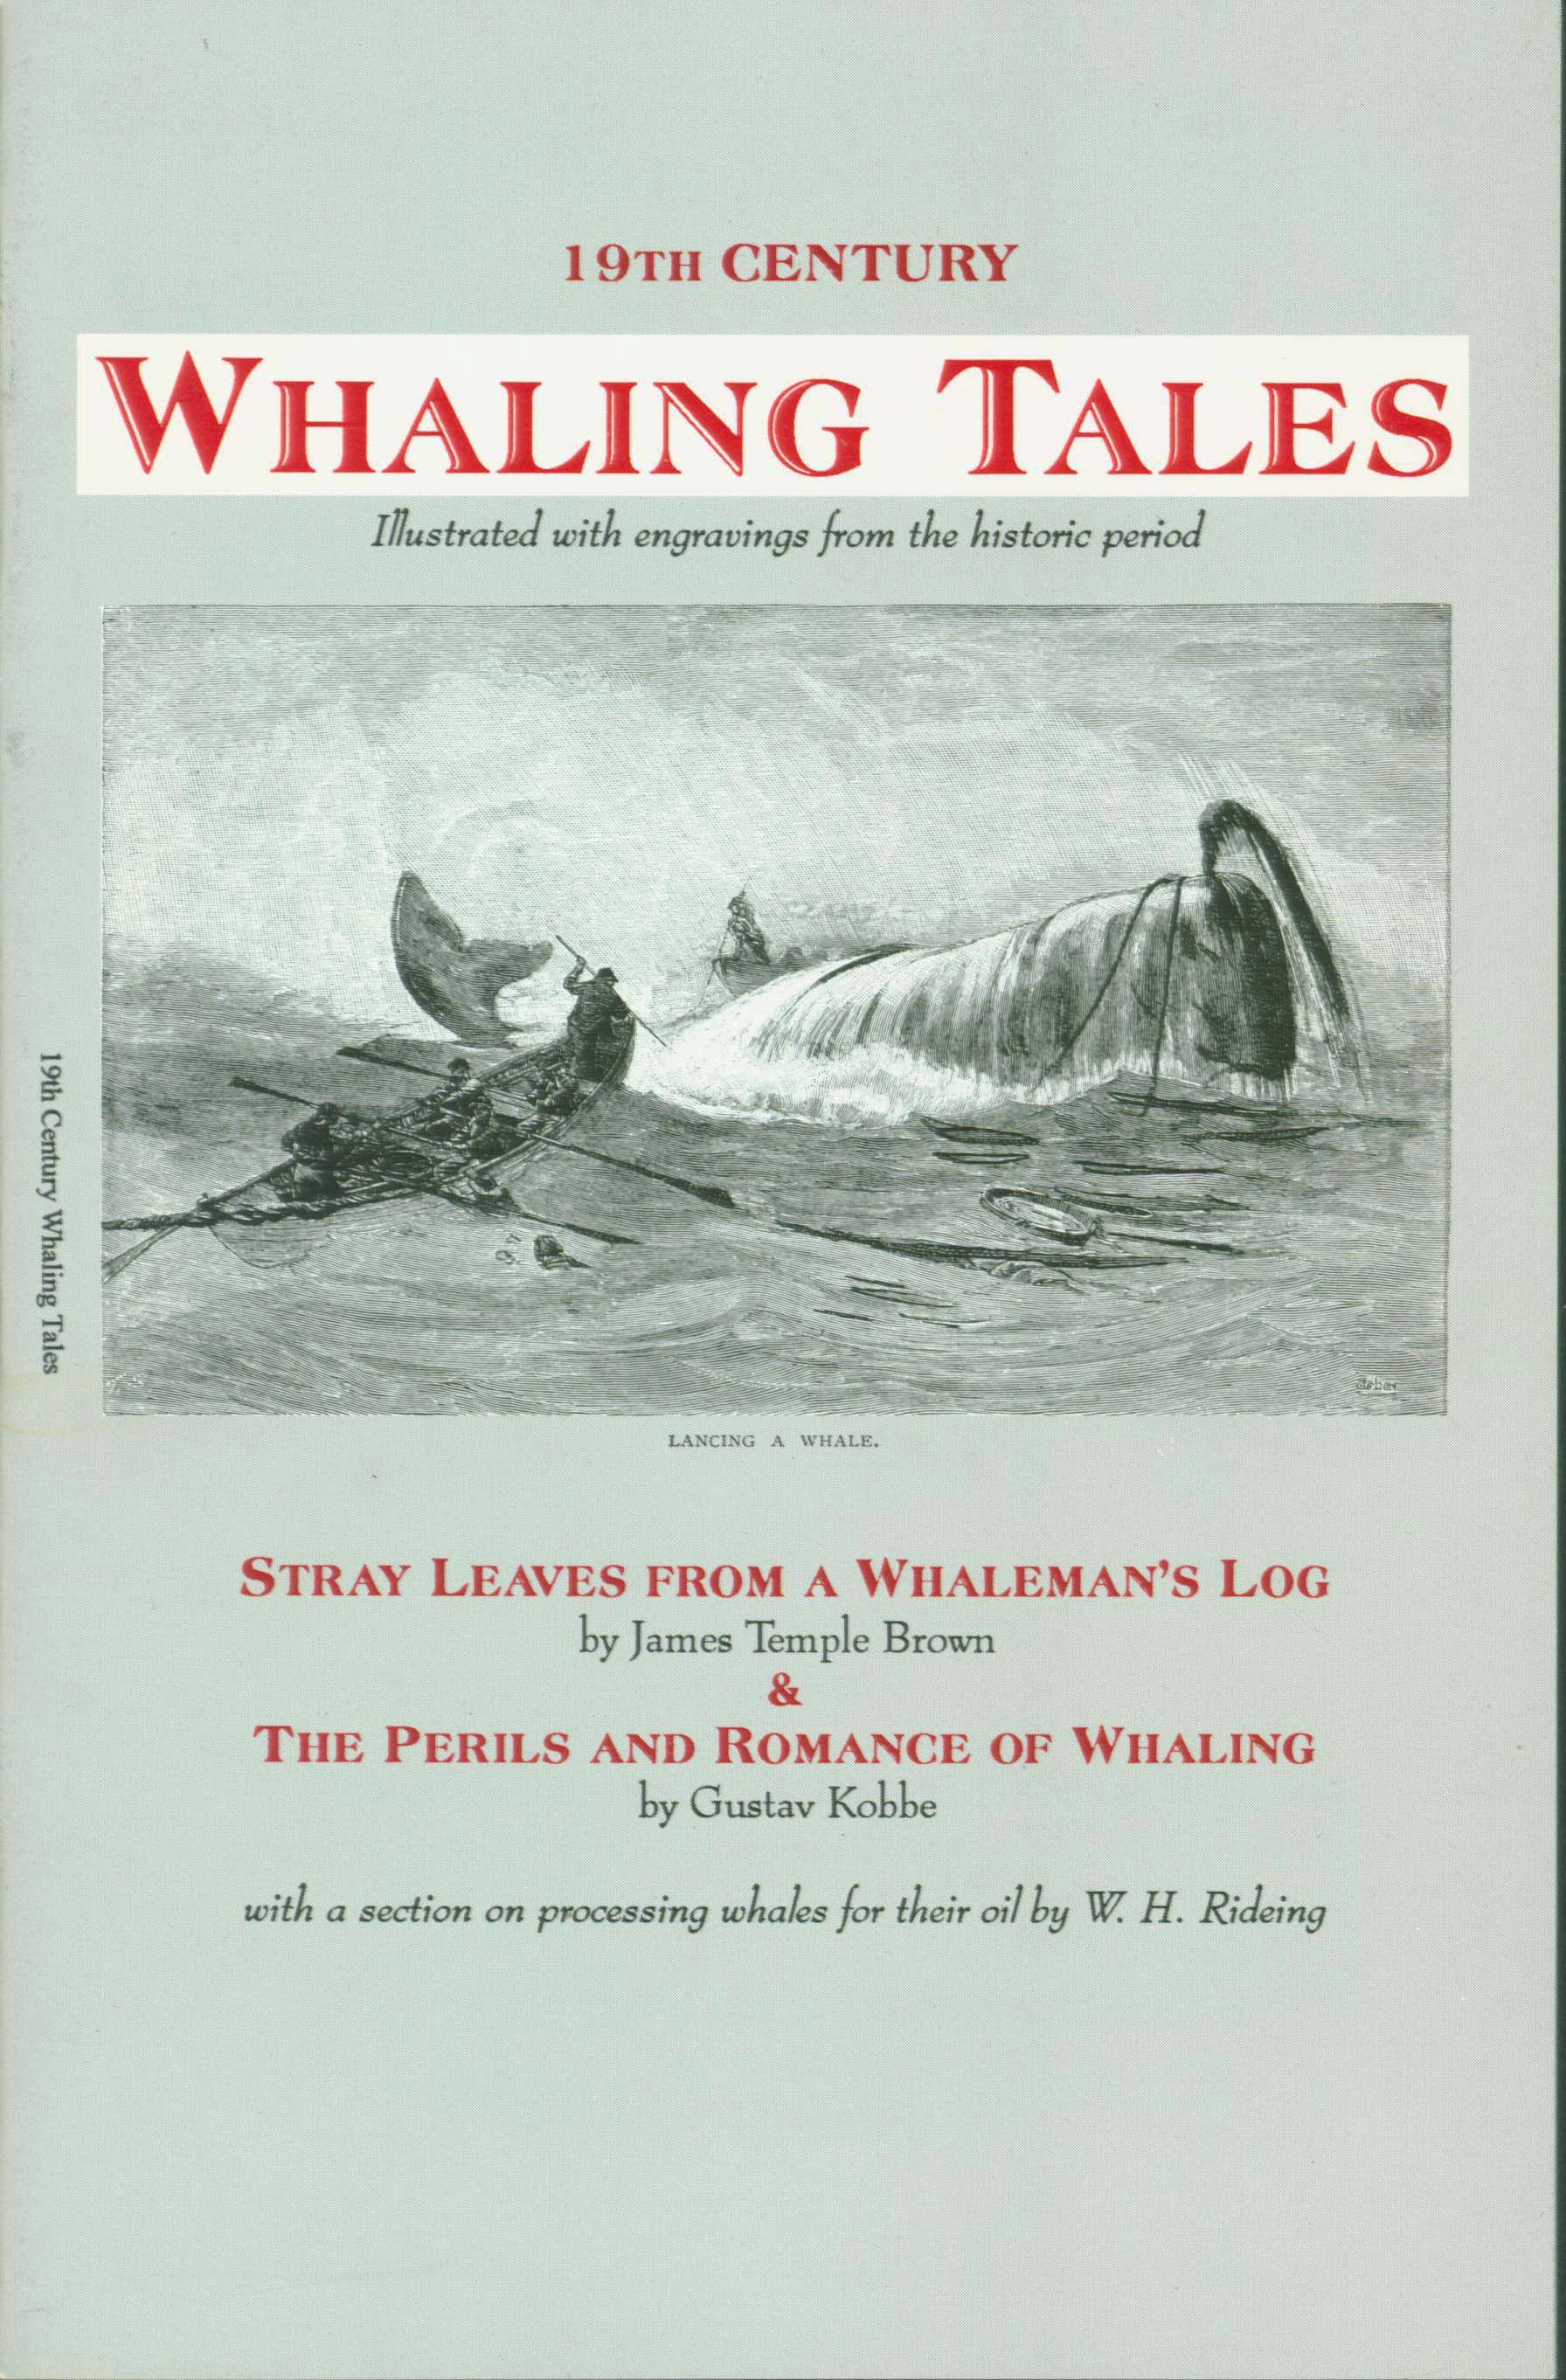 19th CENTURY WHALING TALES. vist0089frontcover